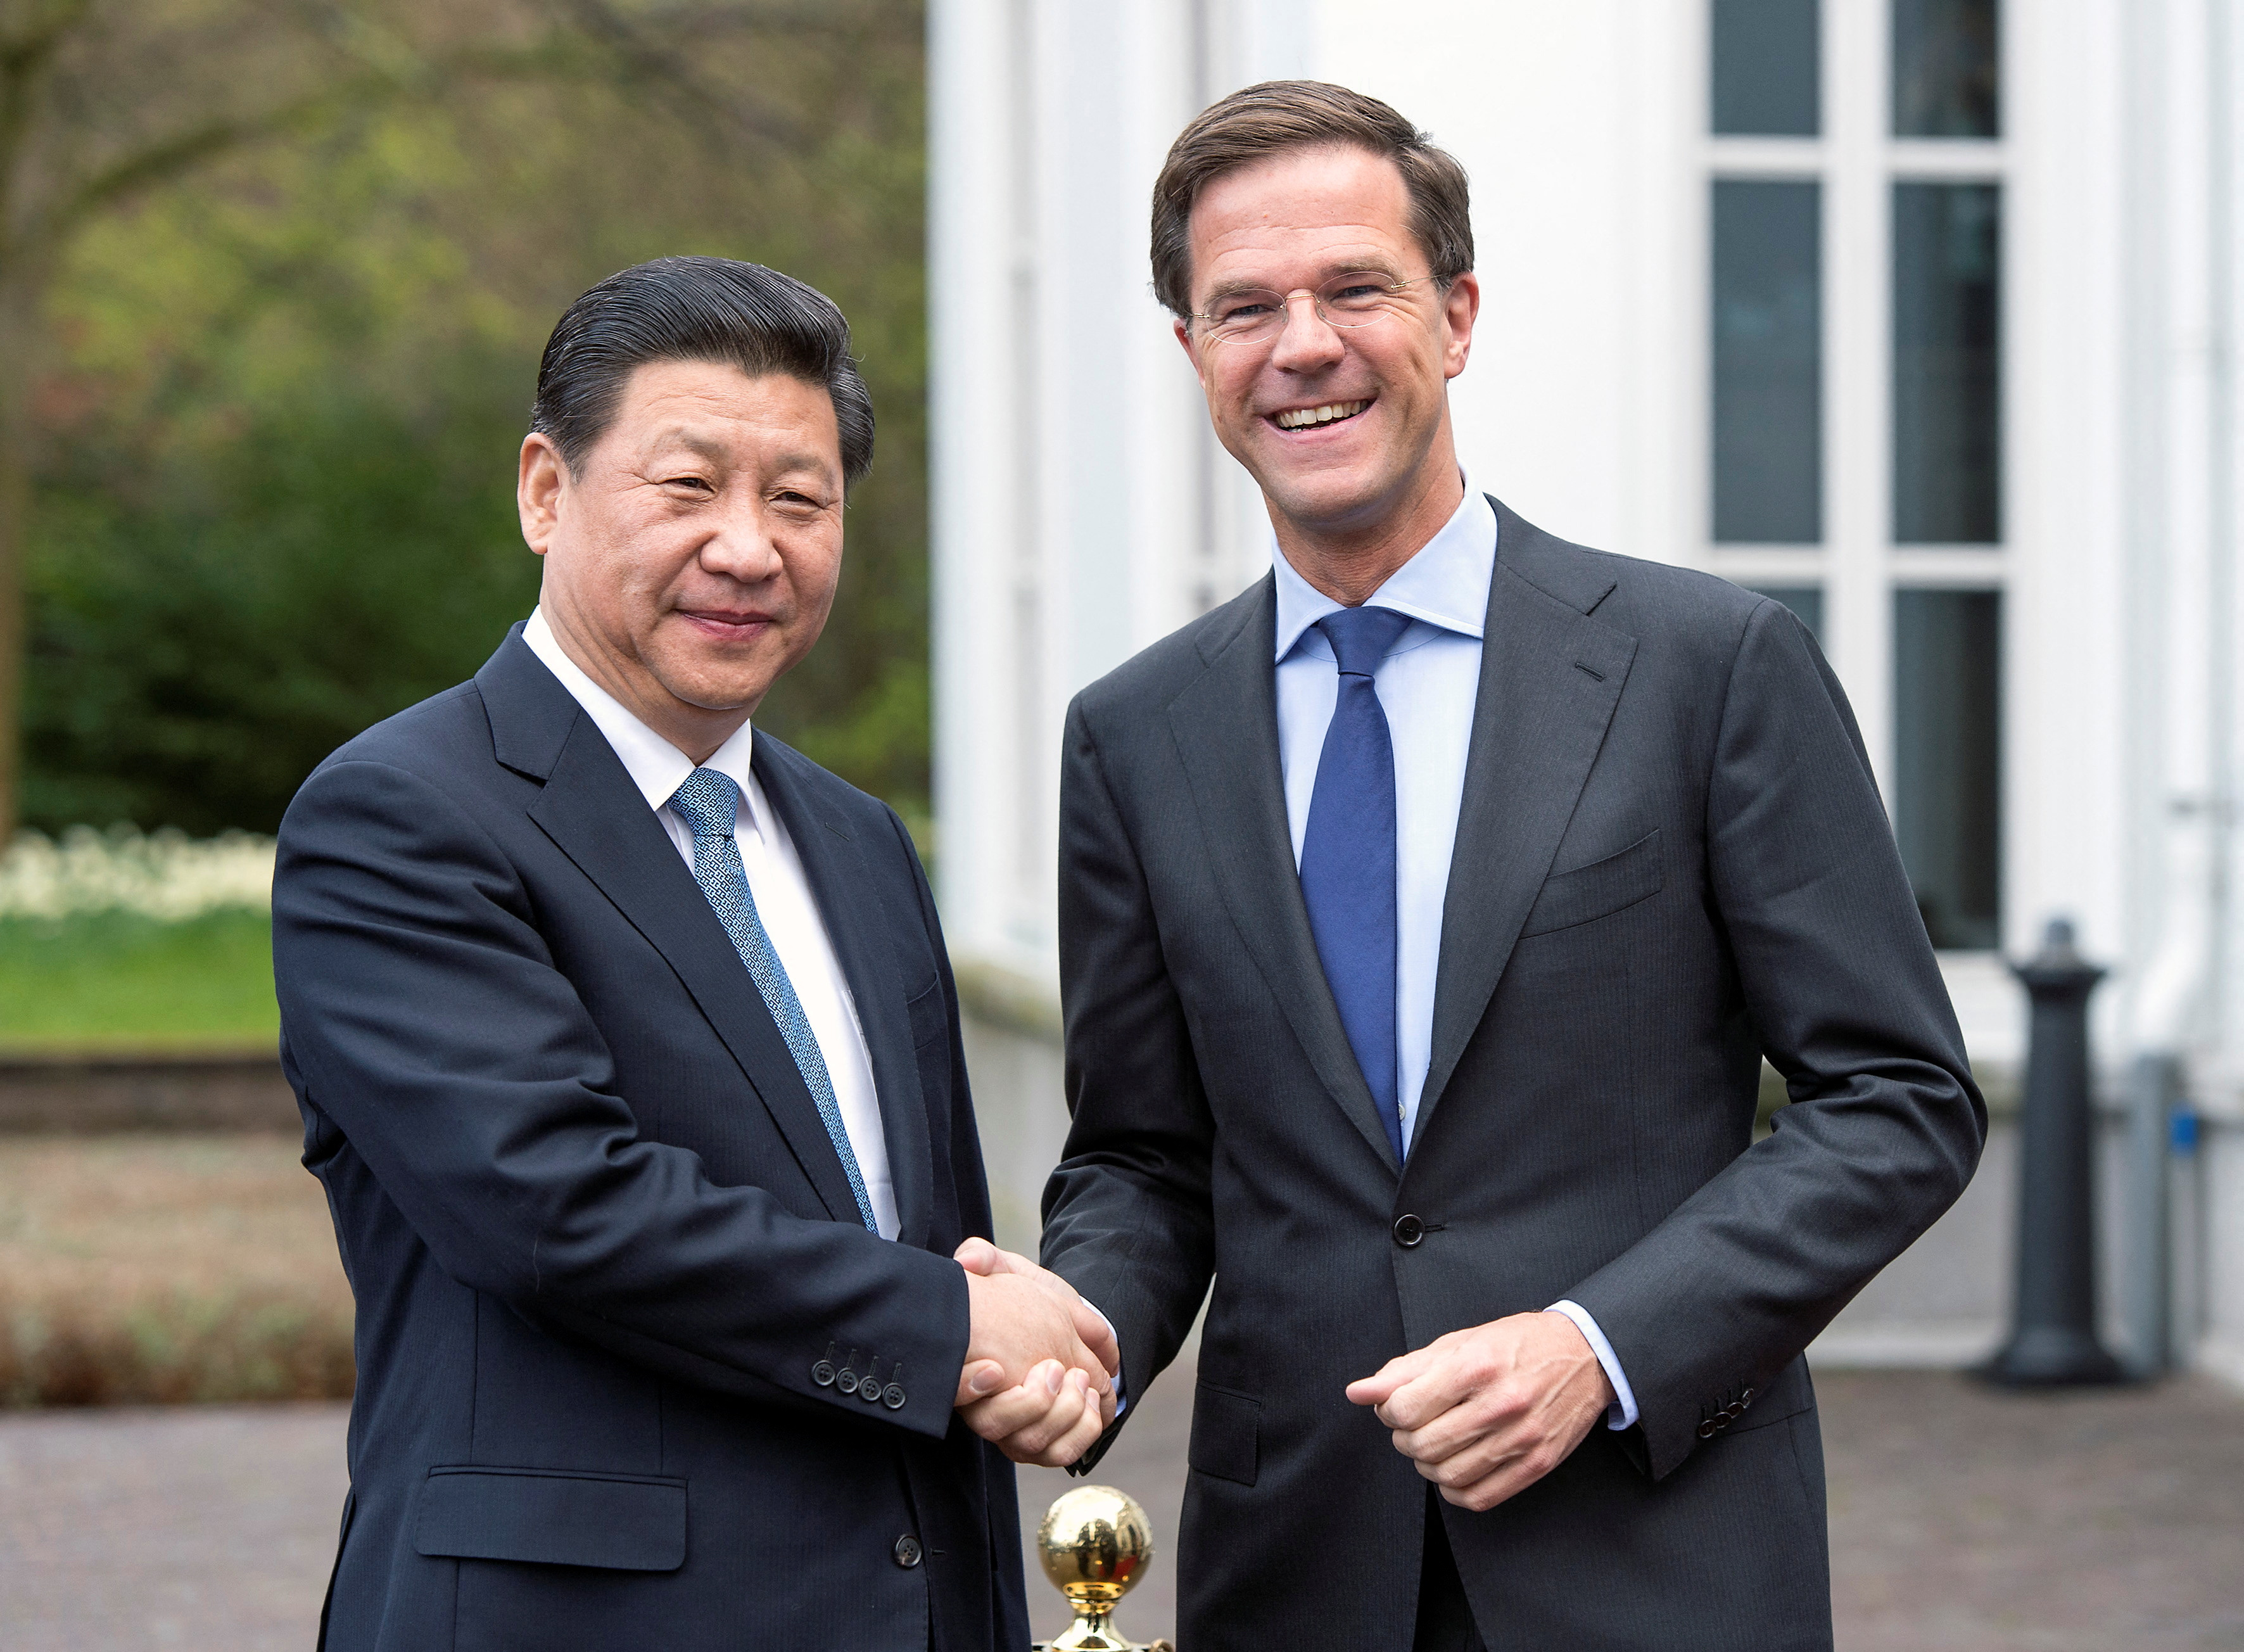 Prime Minister Mark Rutte of the Netherlands welcomes China's President Xi Jinping on the second day of his state visit, at The Hague